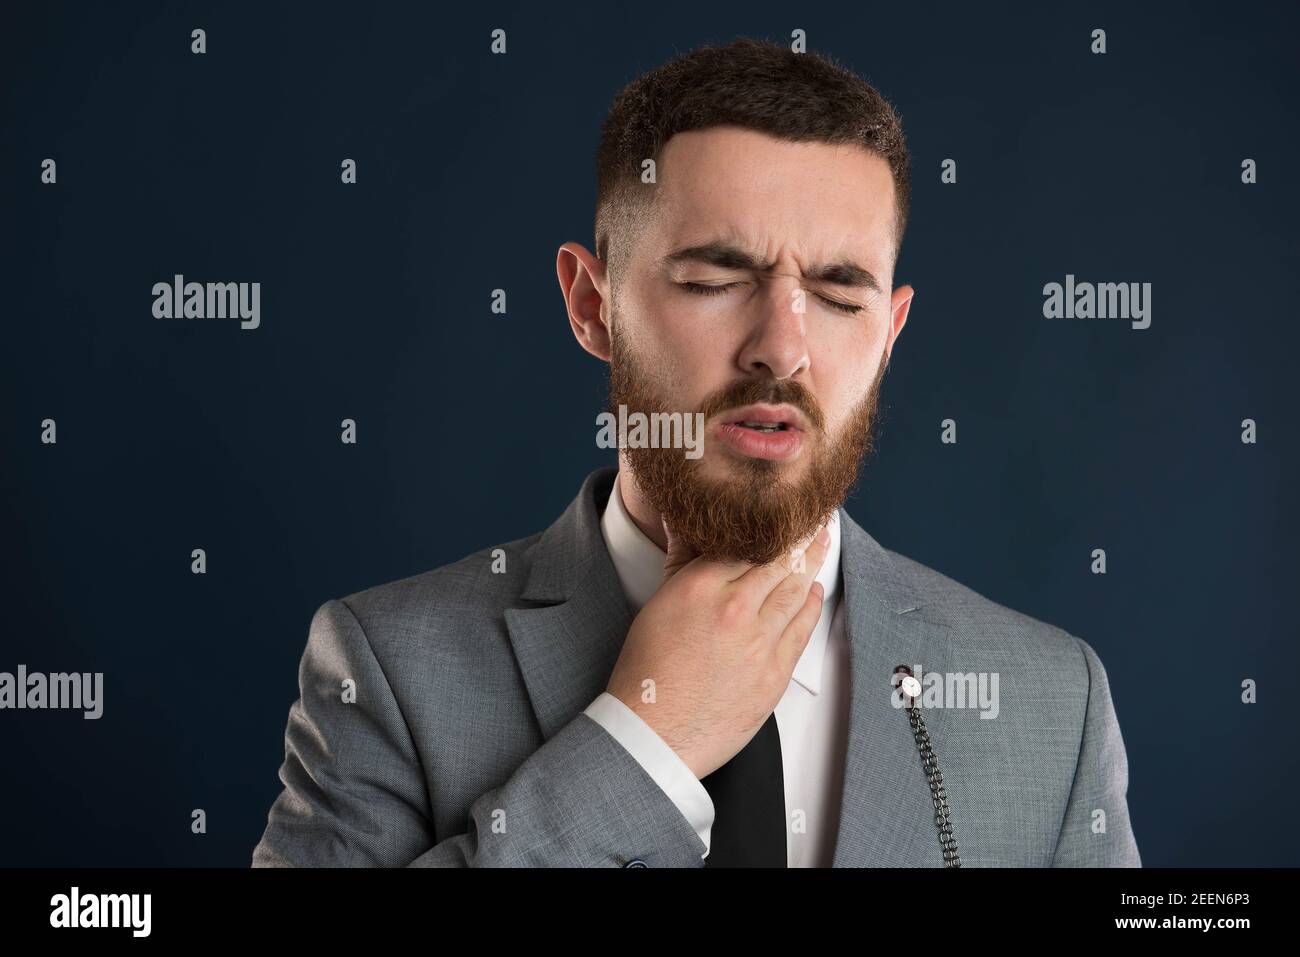 White collar worker having troat pain wearing a black tie and grey suit Stock Photo